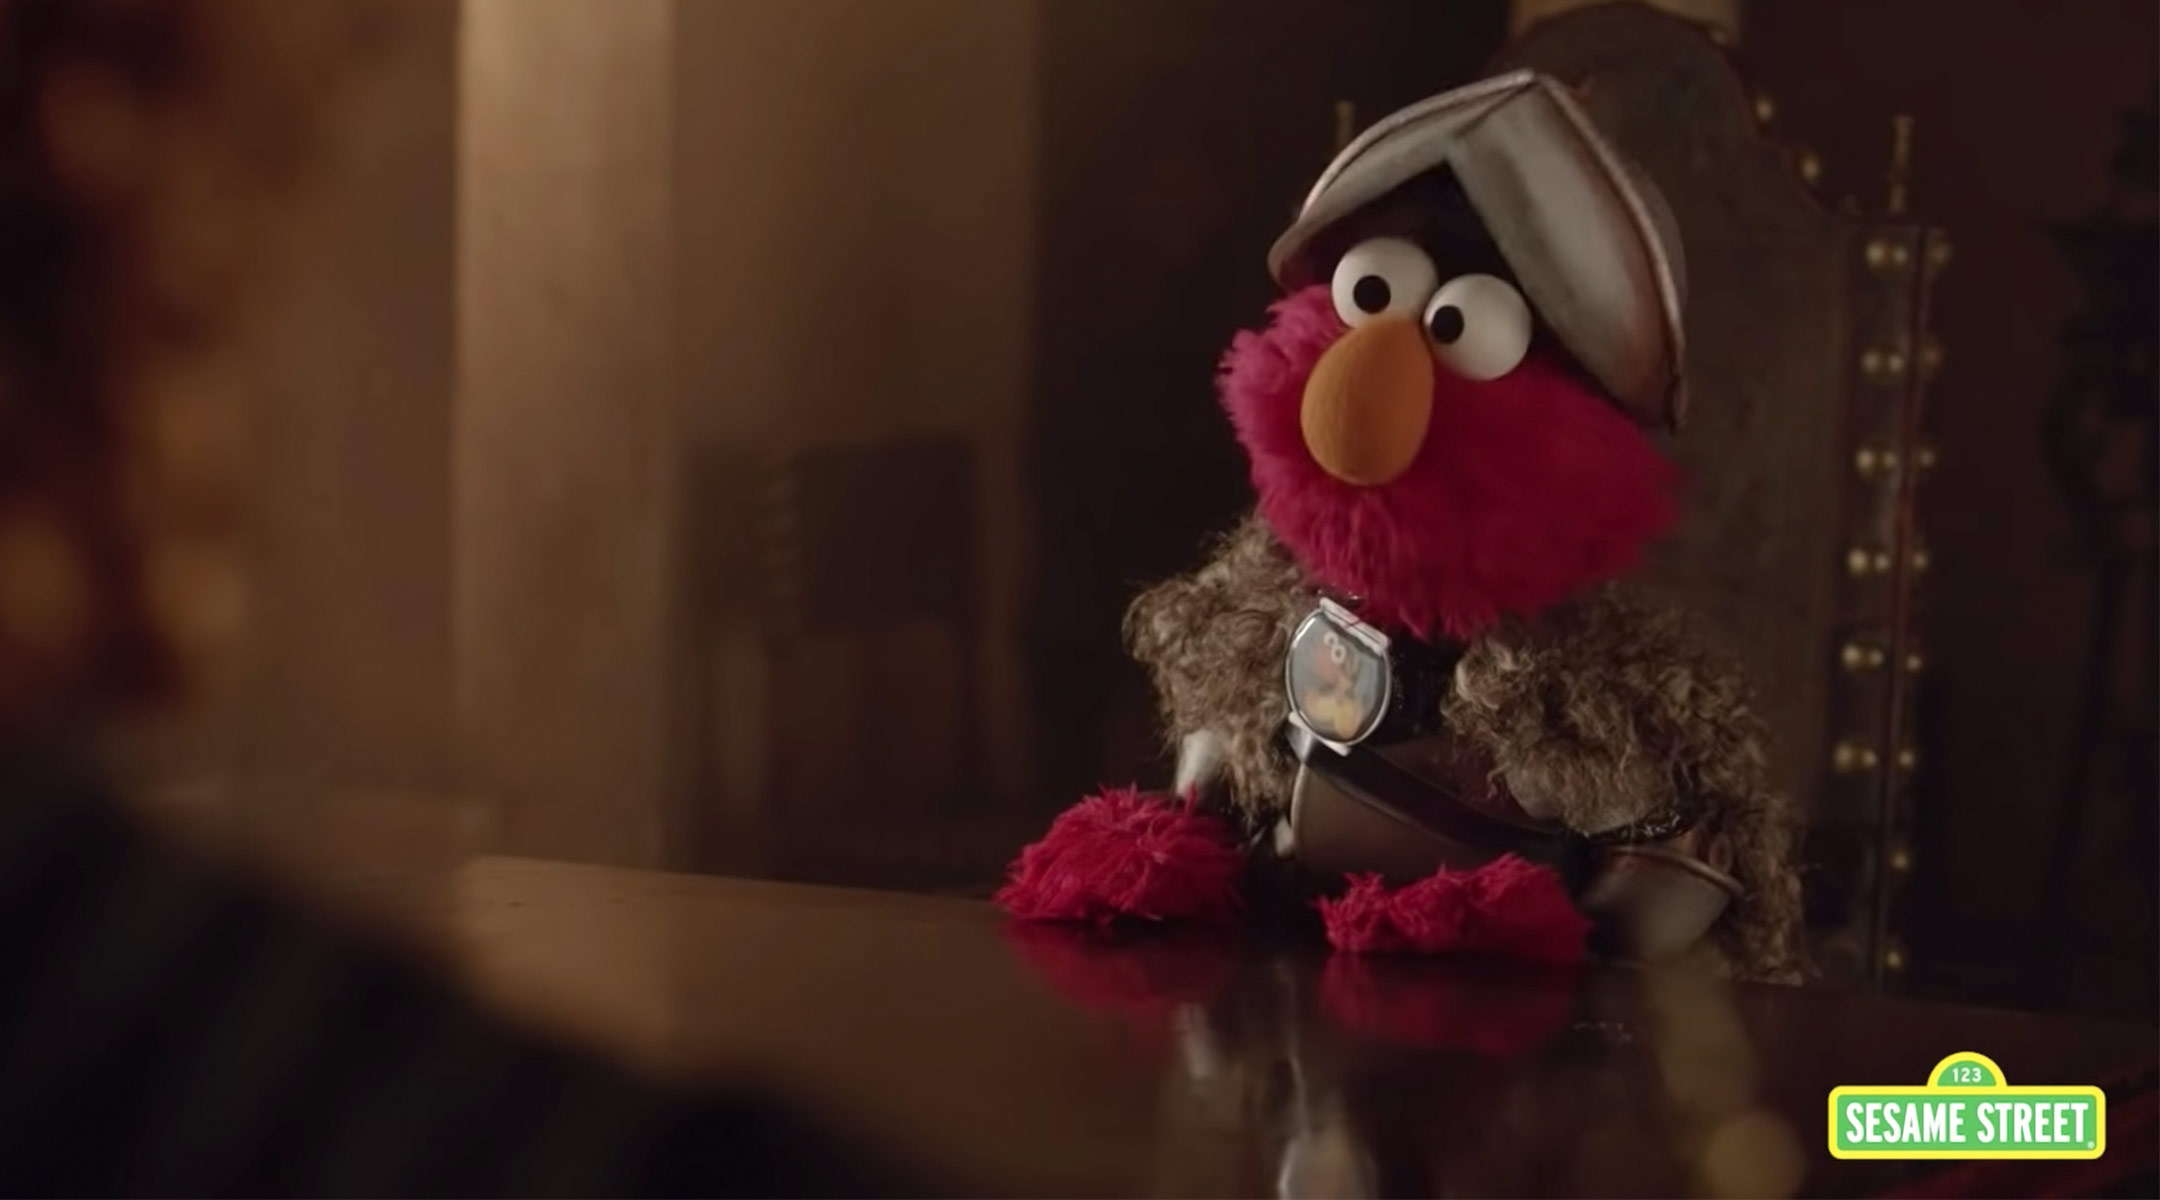 game of thrones spoof with elmo